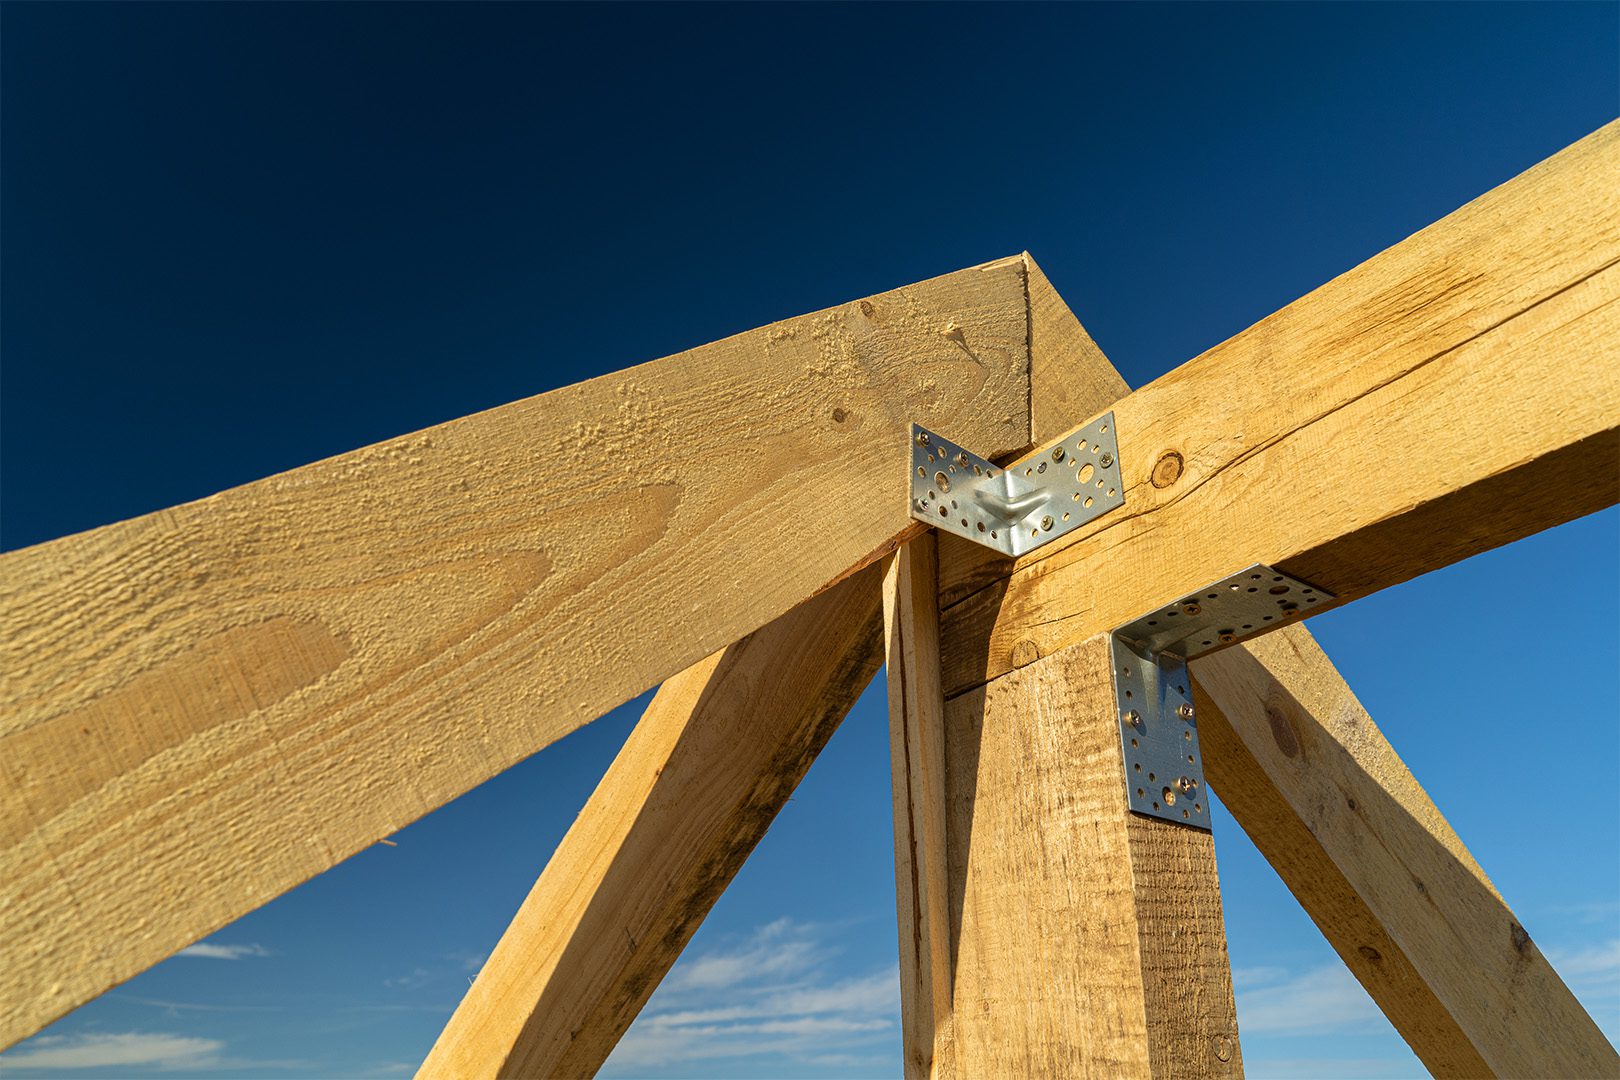 New residential construction home framing and installation of wooden beams at the roof truss system of the house against a blue sky